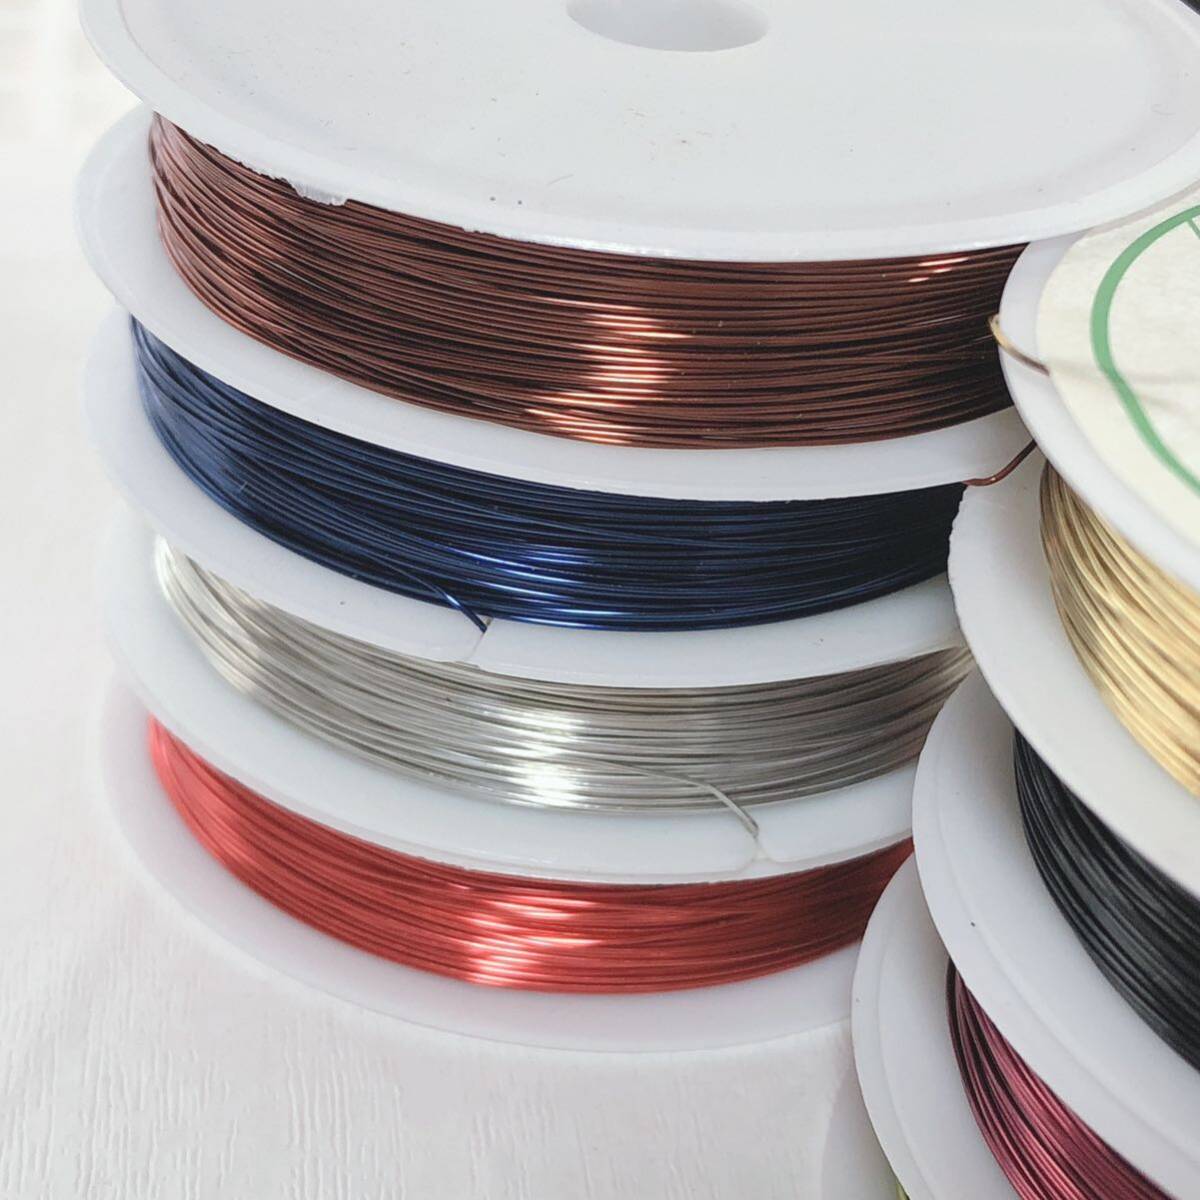 dh838/SALE! copper wire * color wire series approximately 0.4mm10 piece 